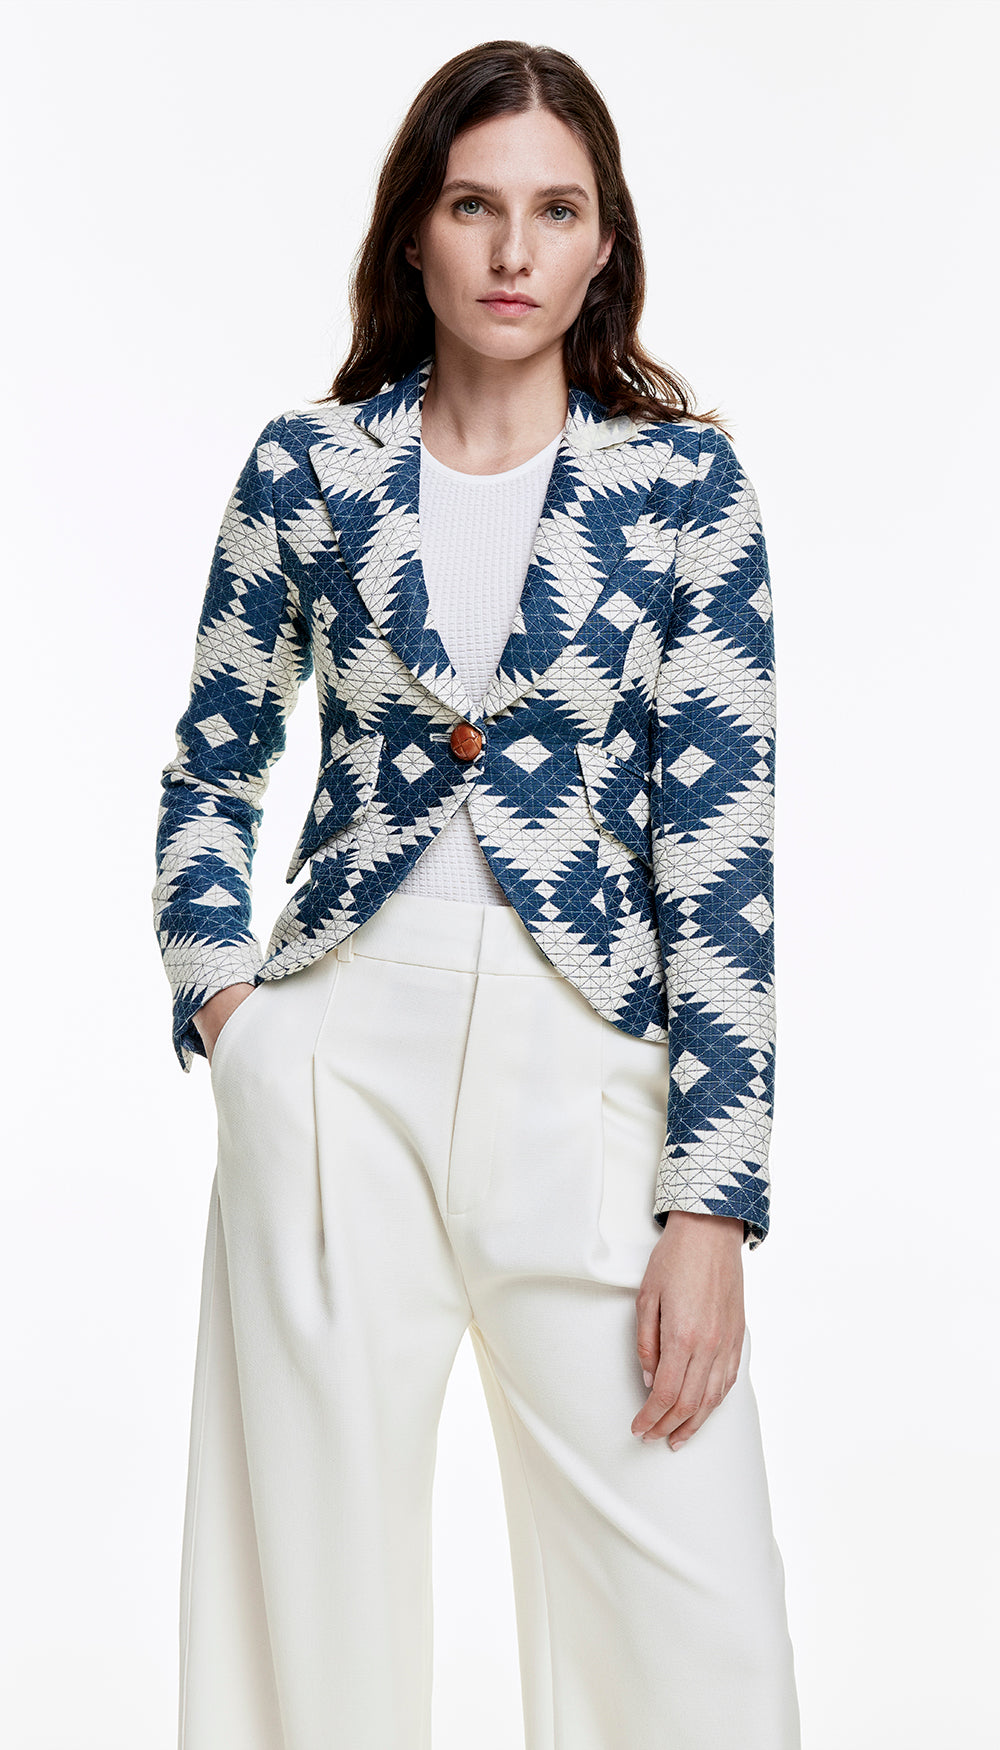 A woman in a blue and white quilted blazer.